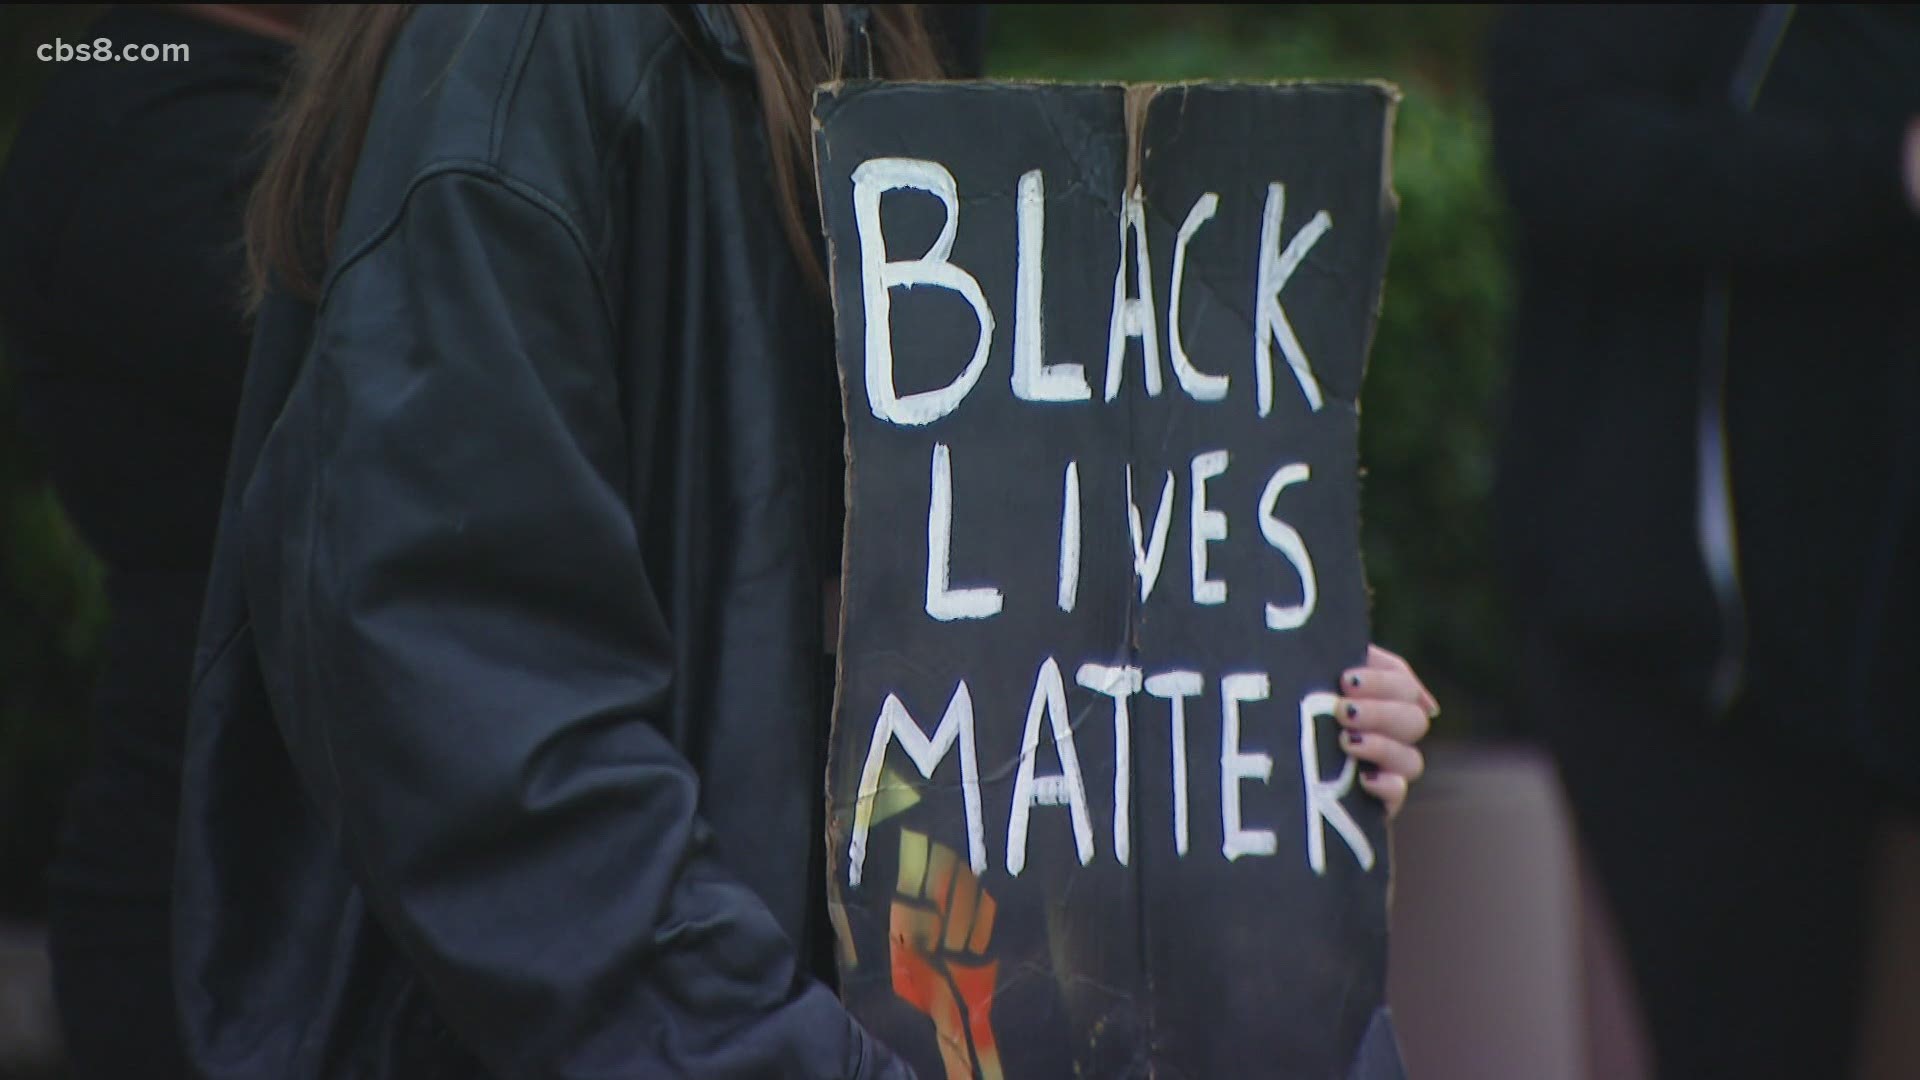 A rally was held Monday at Waterfront Park in downtown San Diego after the shooting of a 20-year-old Black man by police outside Minneapolis